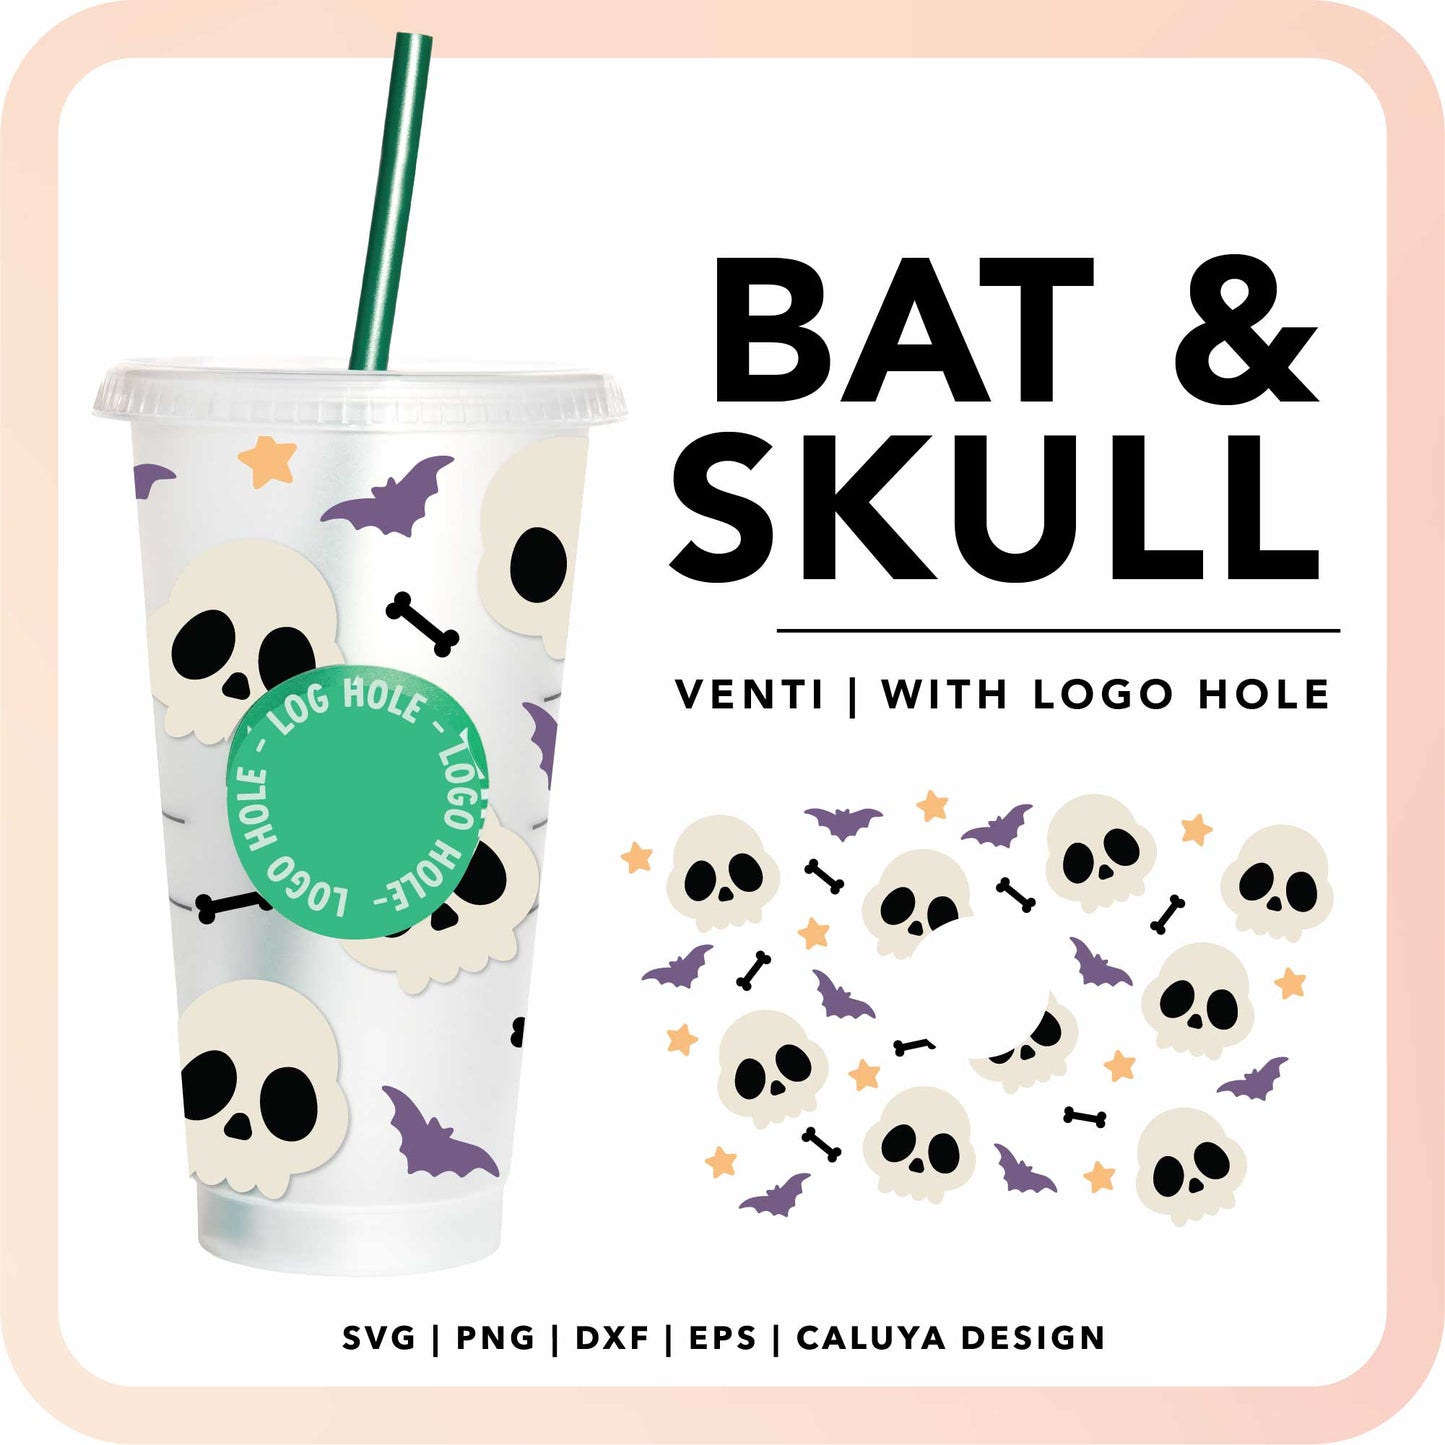 With Logo Venti Cup Wrap SVG | Skull & Bat Halloween Wrap SVG Cut File for Cricut, Cameo Silhouette | Free SVG Cut File